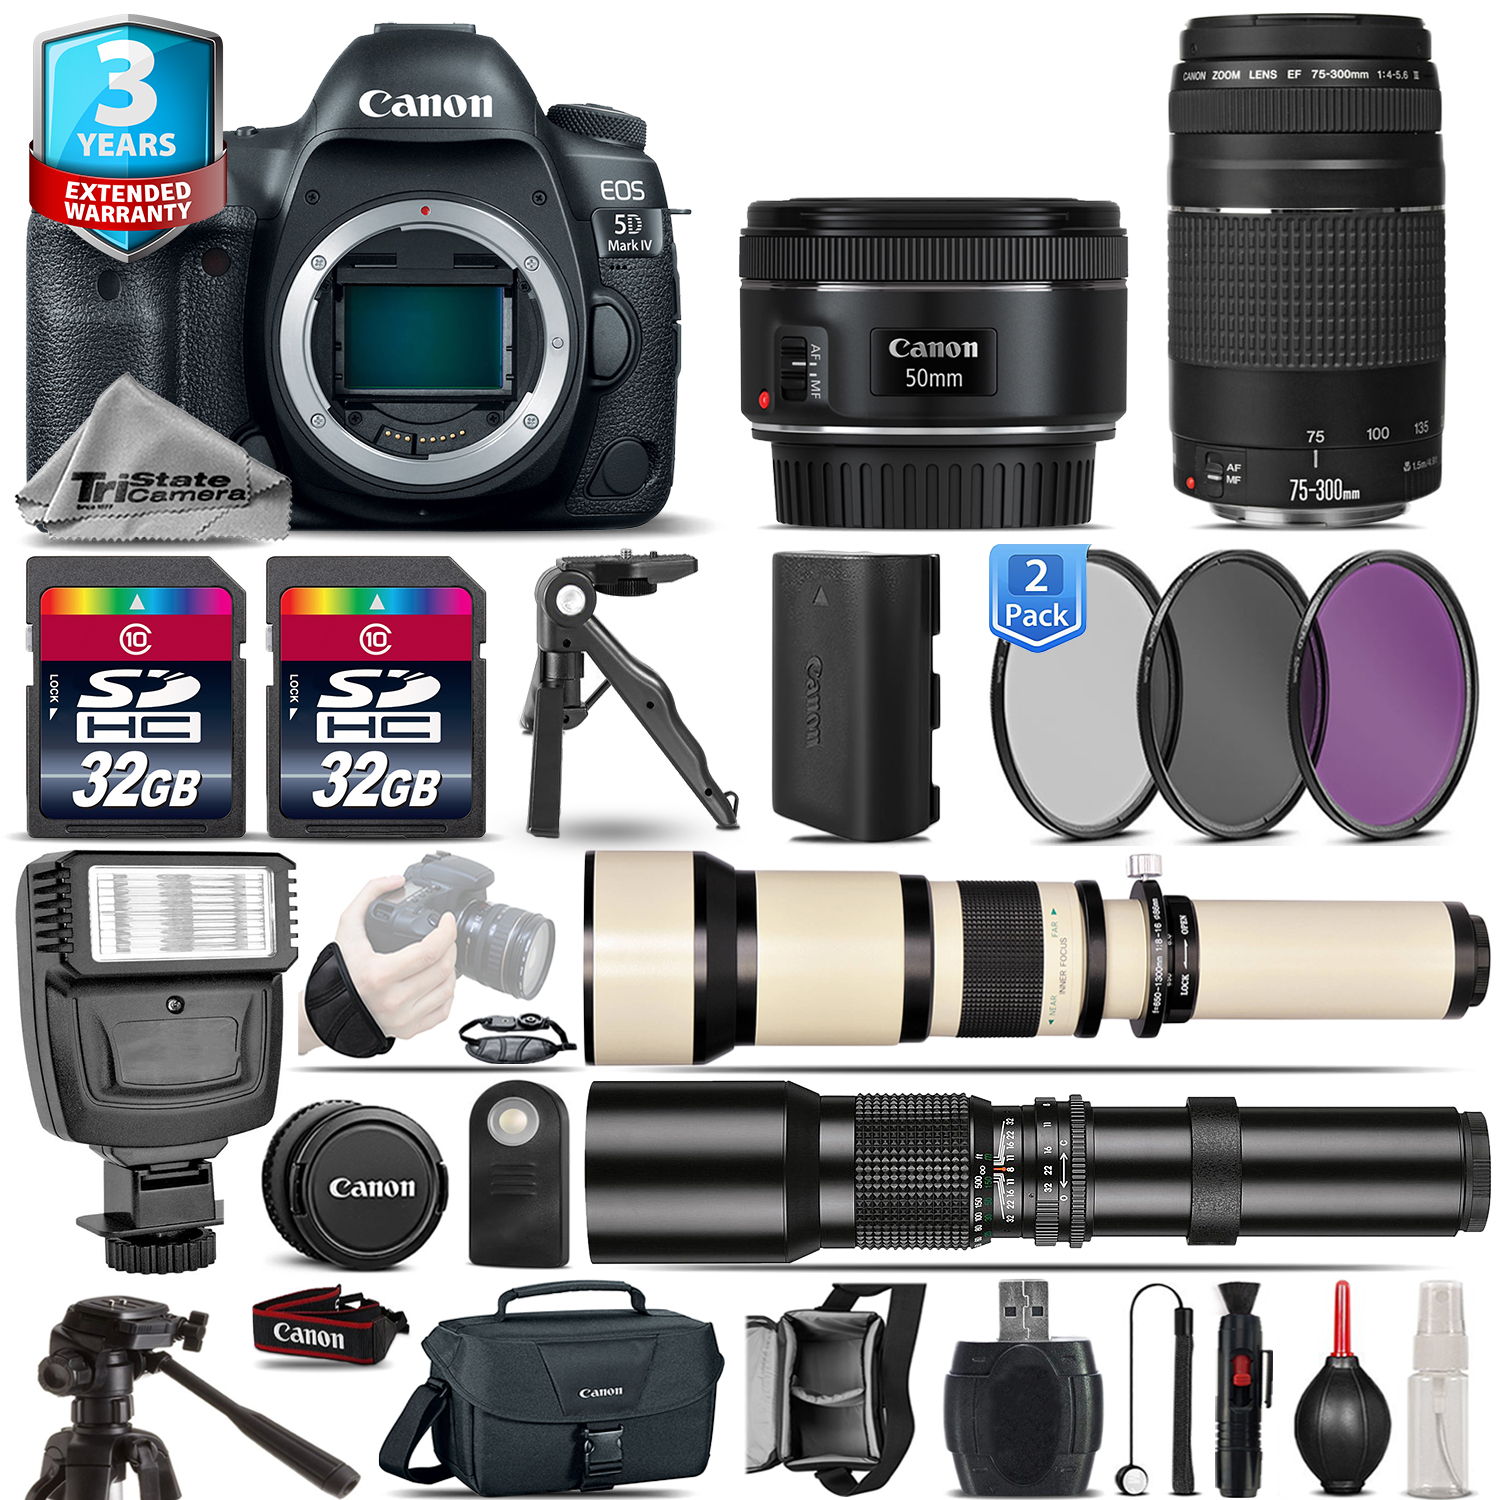 Canon EOS 5D Mark IV Camera + 50mm STM + 75-300mm III+ 2yr Warranty - 64GB Kit - image 1 of 11